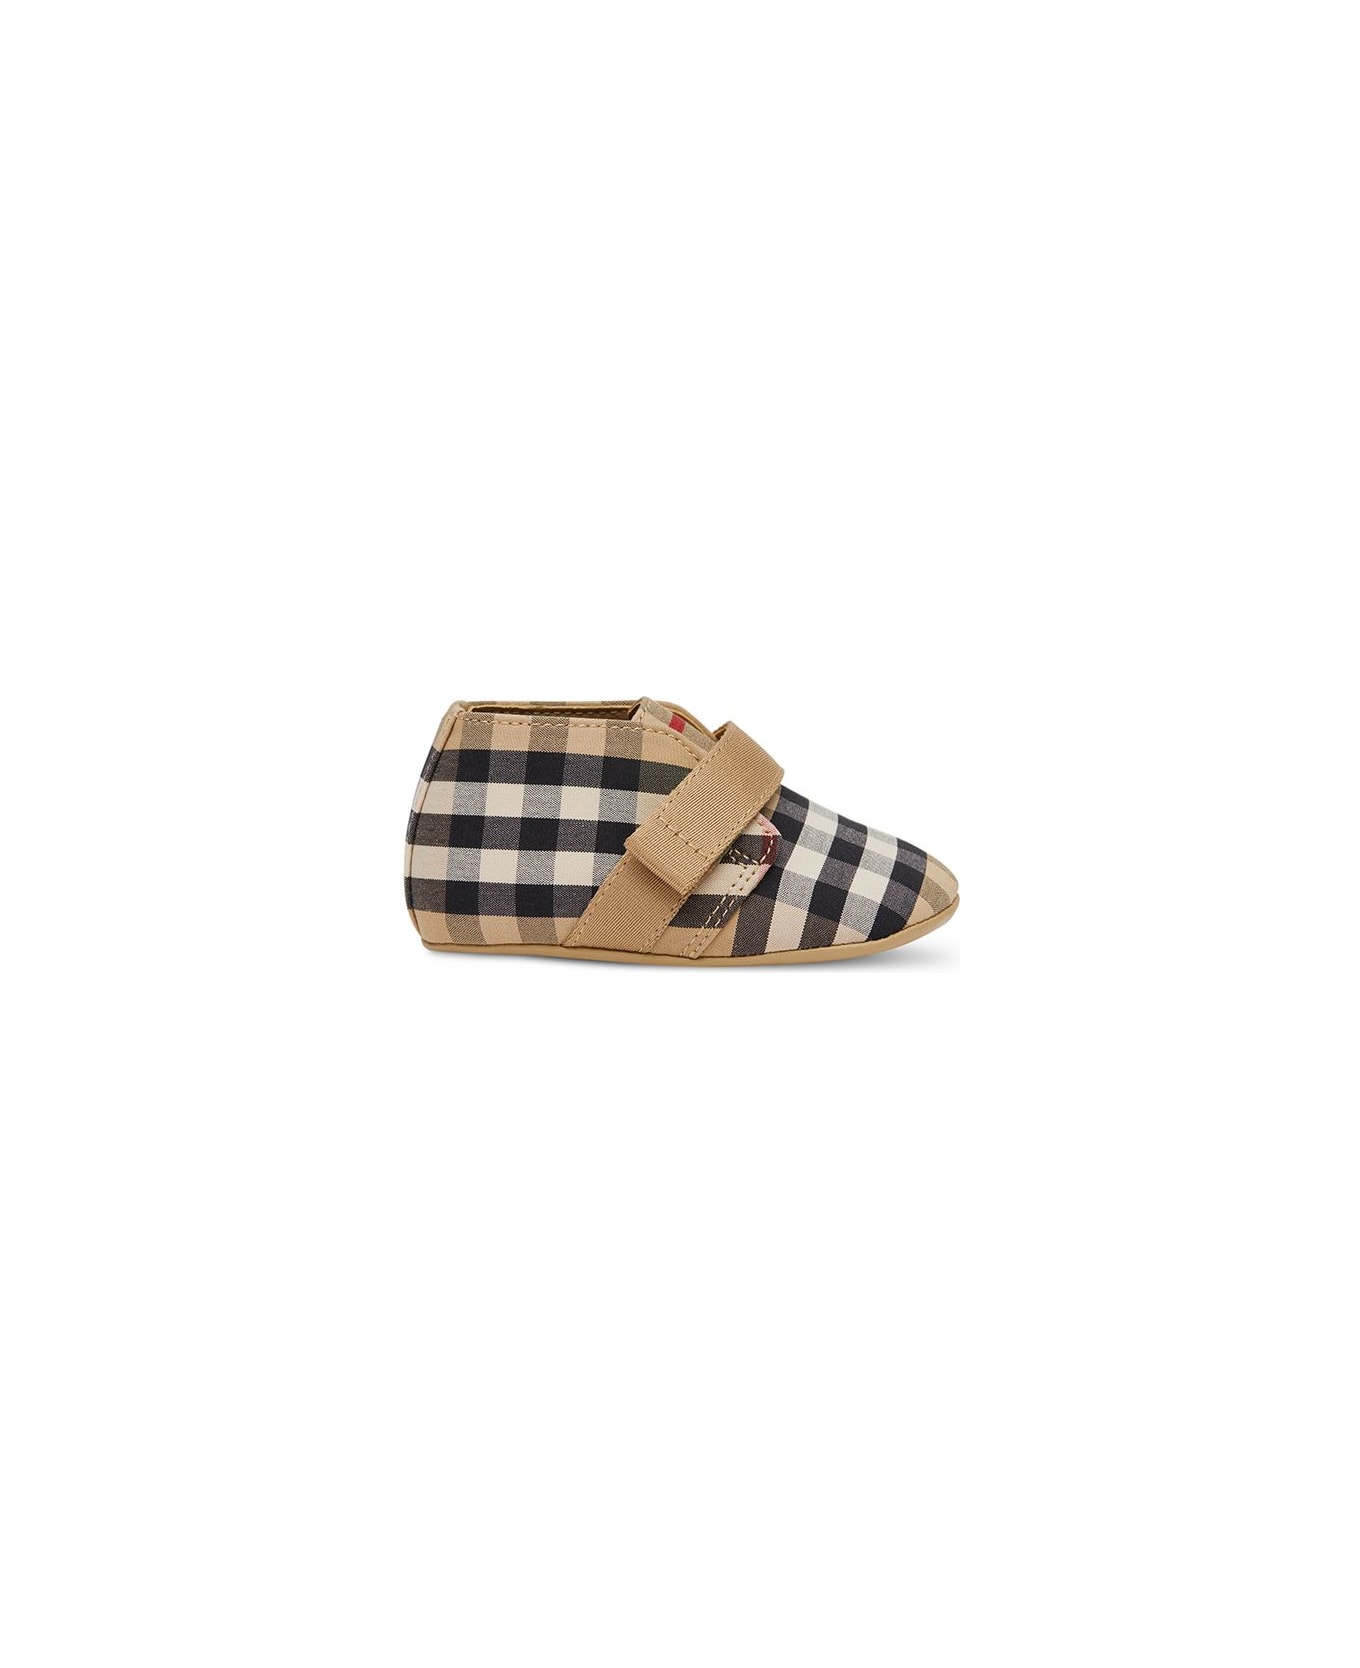 Burberry Kids Baby's Vintage Check Crib Shoes - Beige